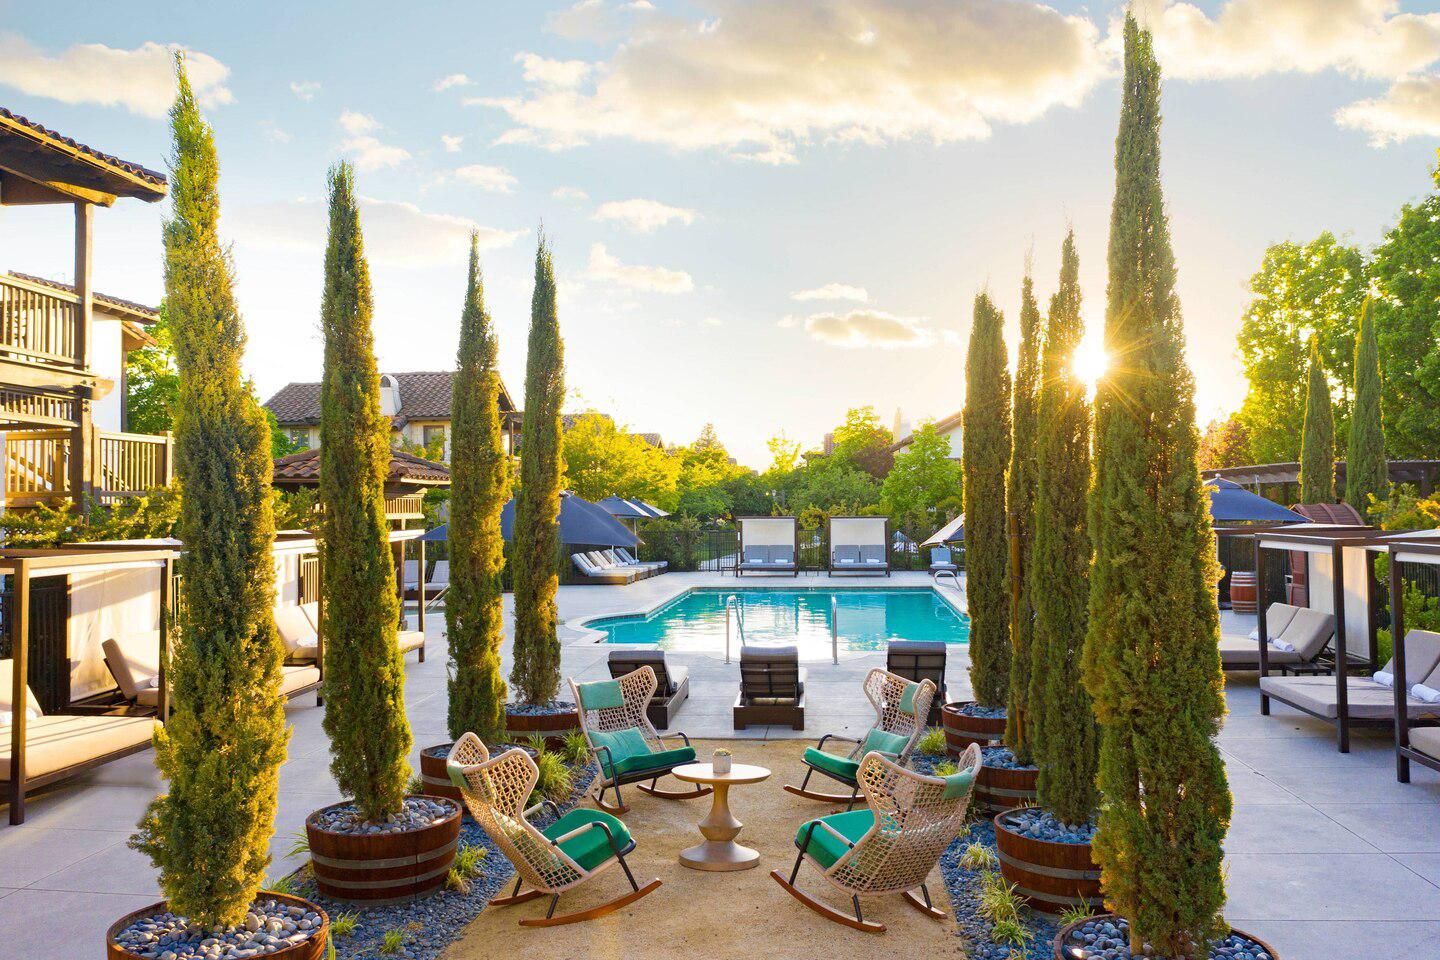 7 Wine Country Hotels Flaunt Fresh Renovations in Time for Harvest Season